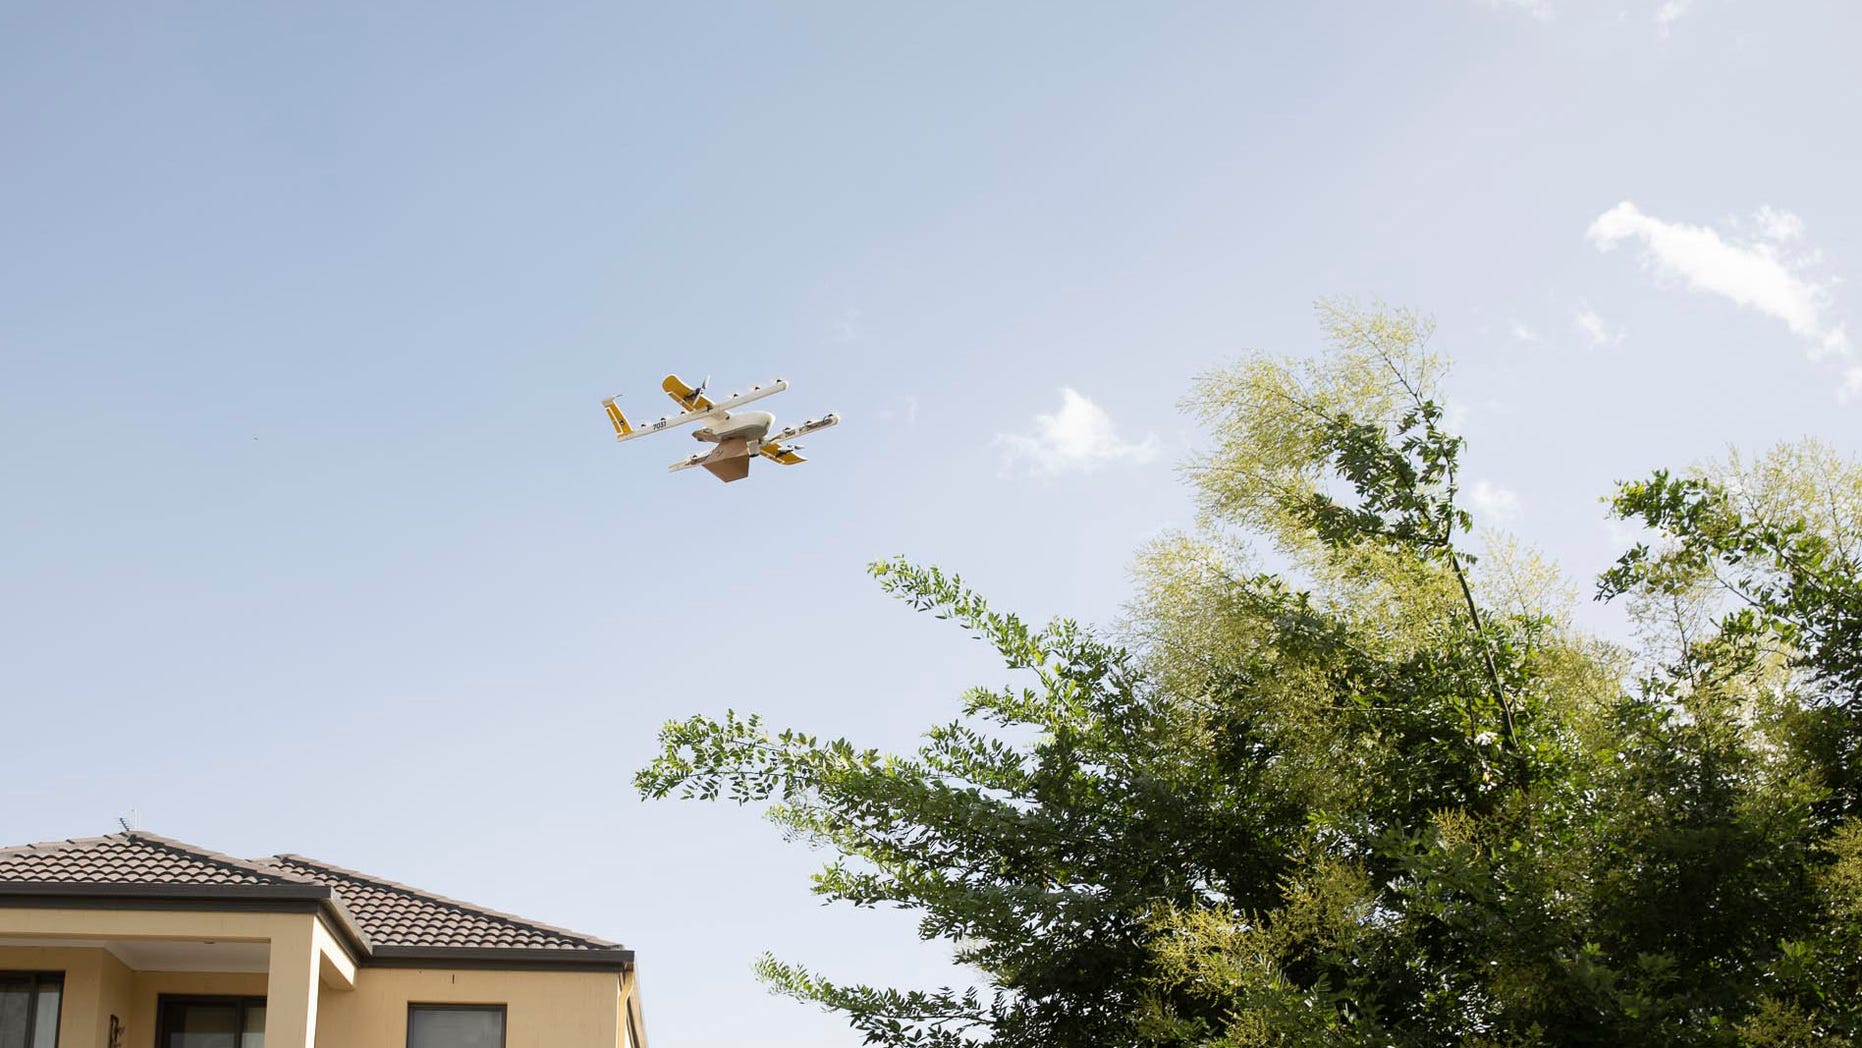 Project Wing launched its first commercial drone delivery service in Australia's capital. The drones lower small items to the front yards of eligible residences by string. (Wing Australia)